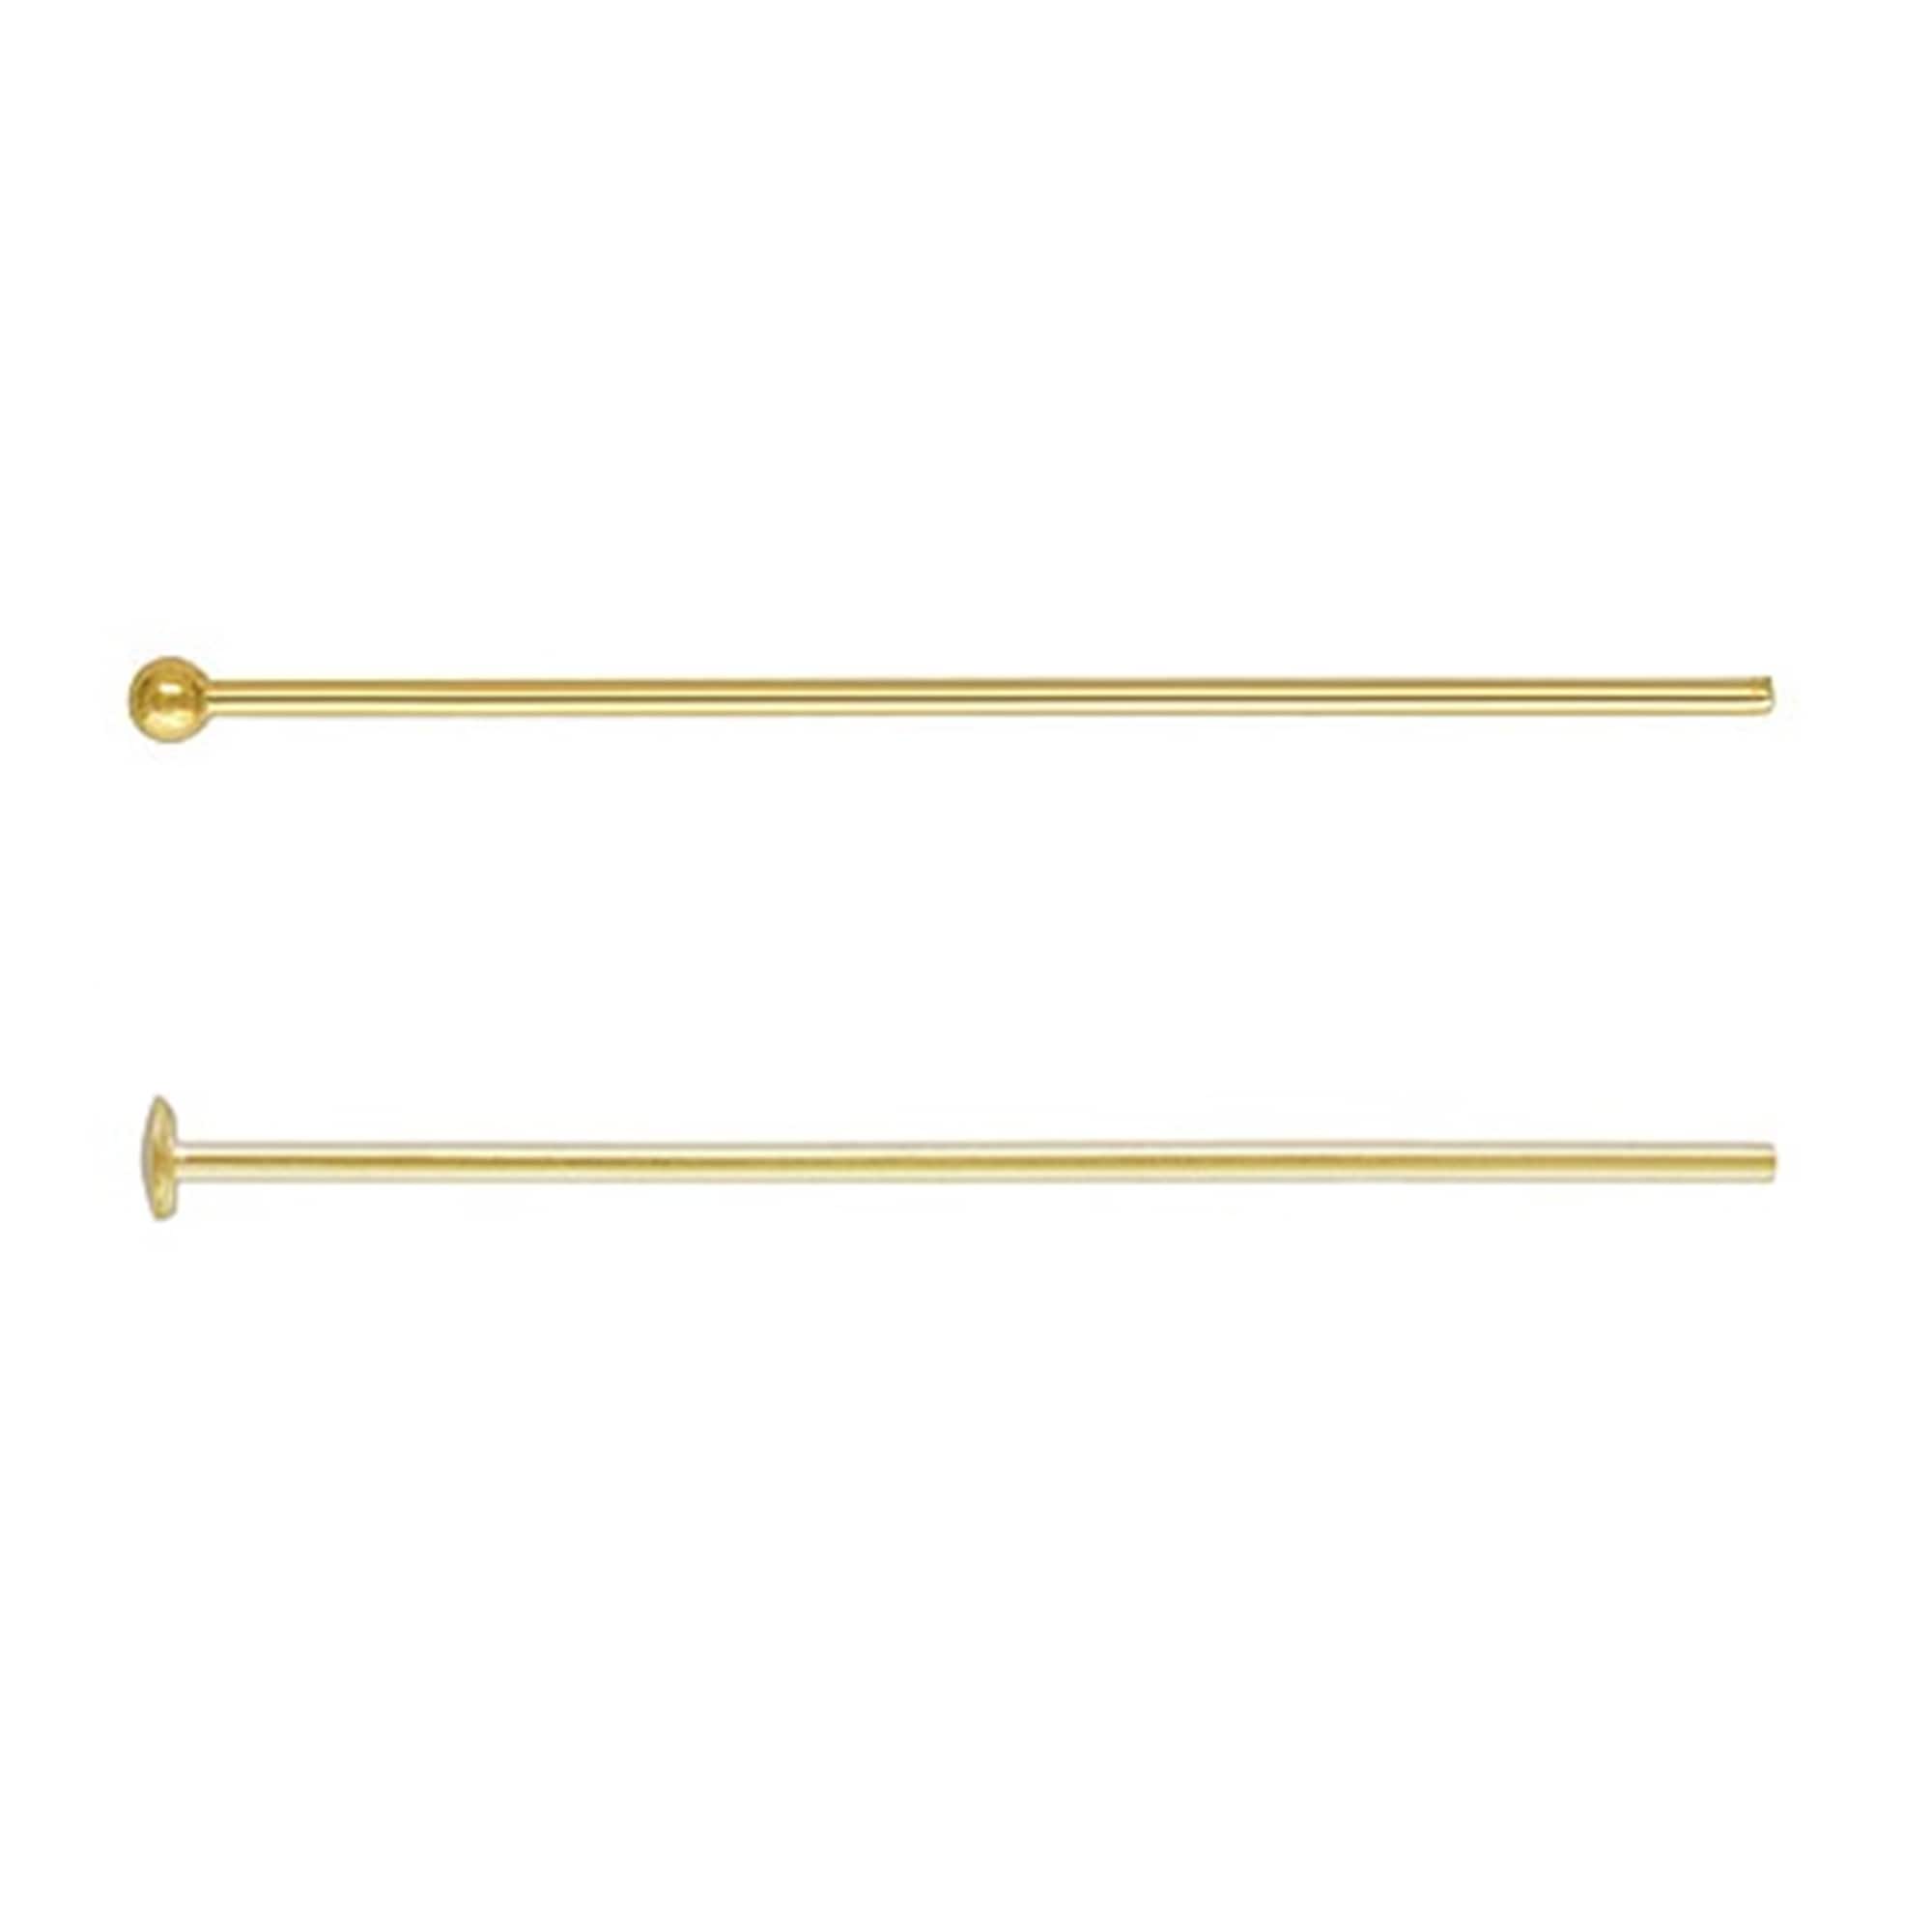 50 Pieces 14Kt Gold Filled Head Pins 24 Gauge 1 inch 